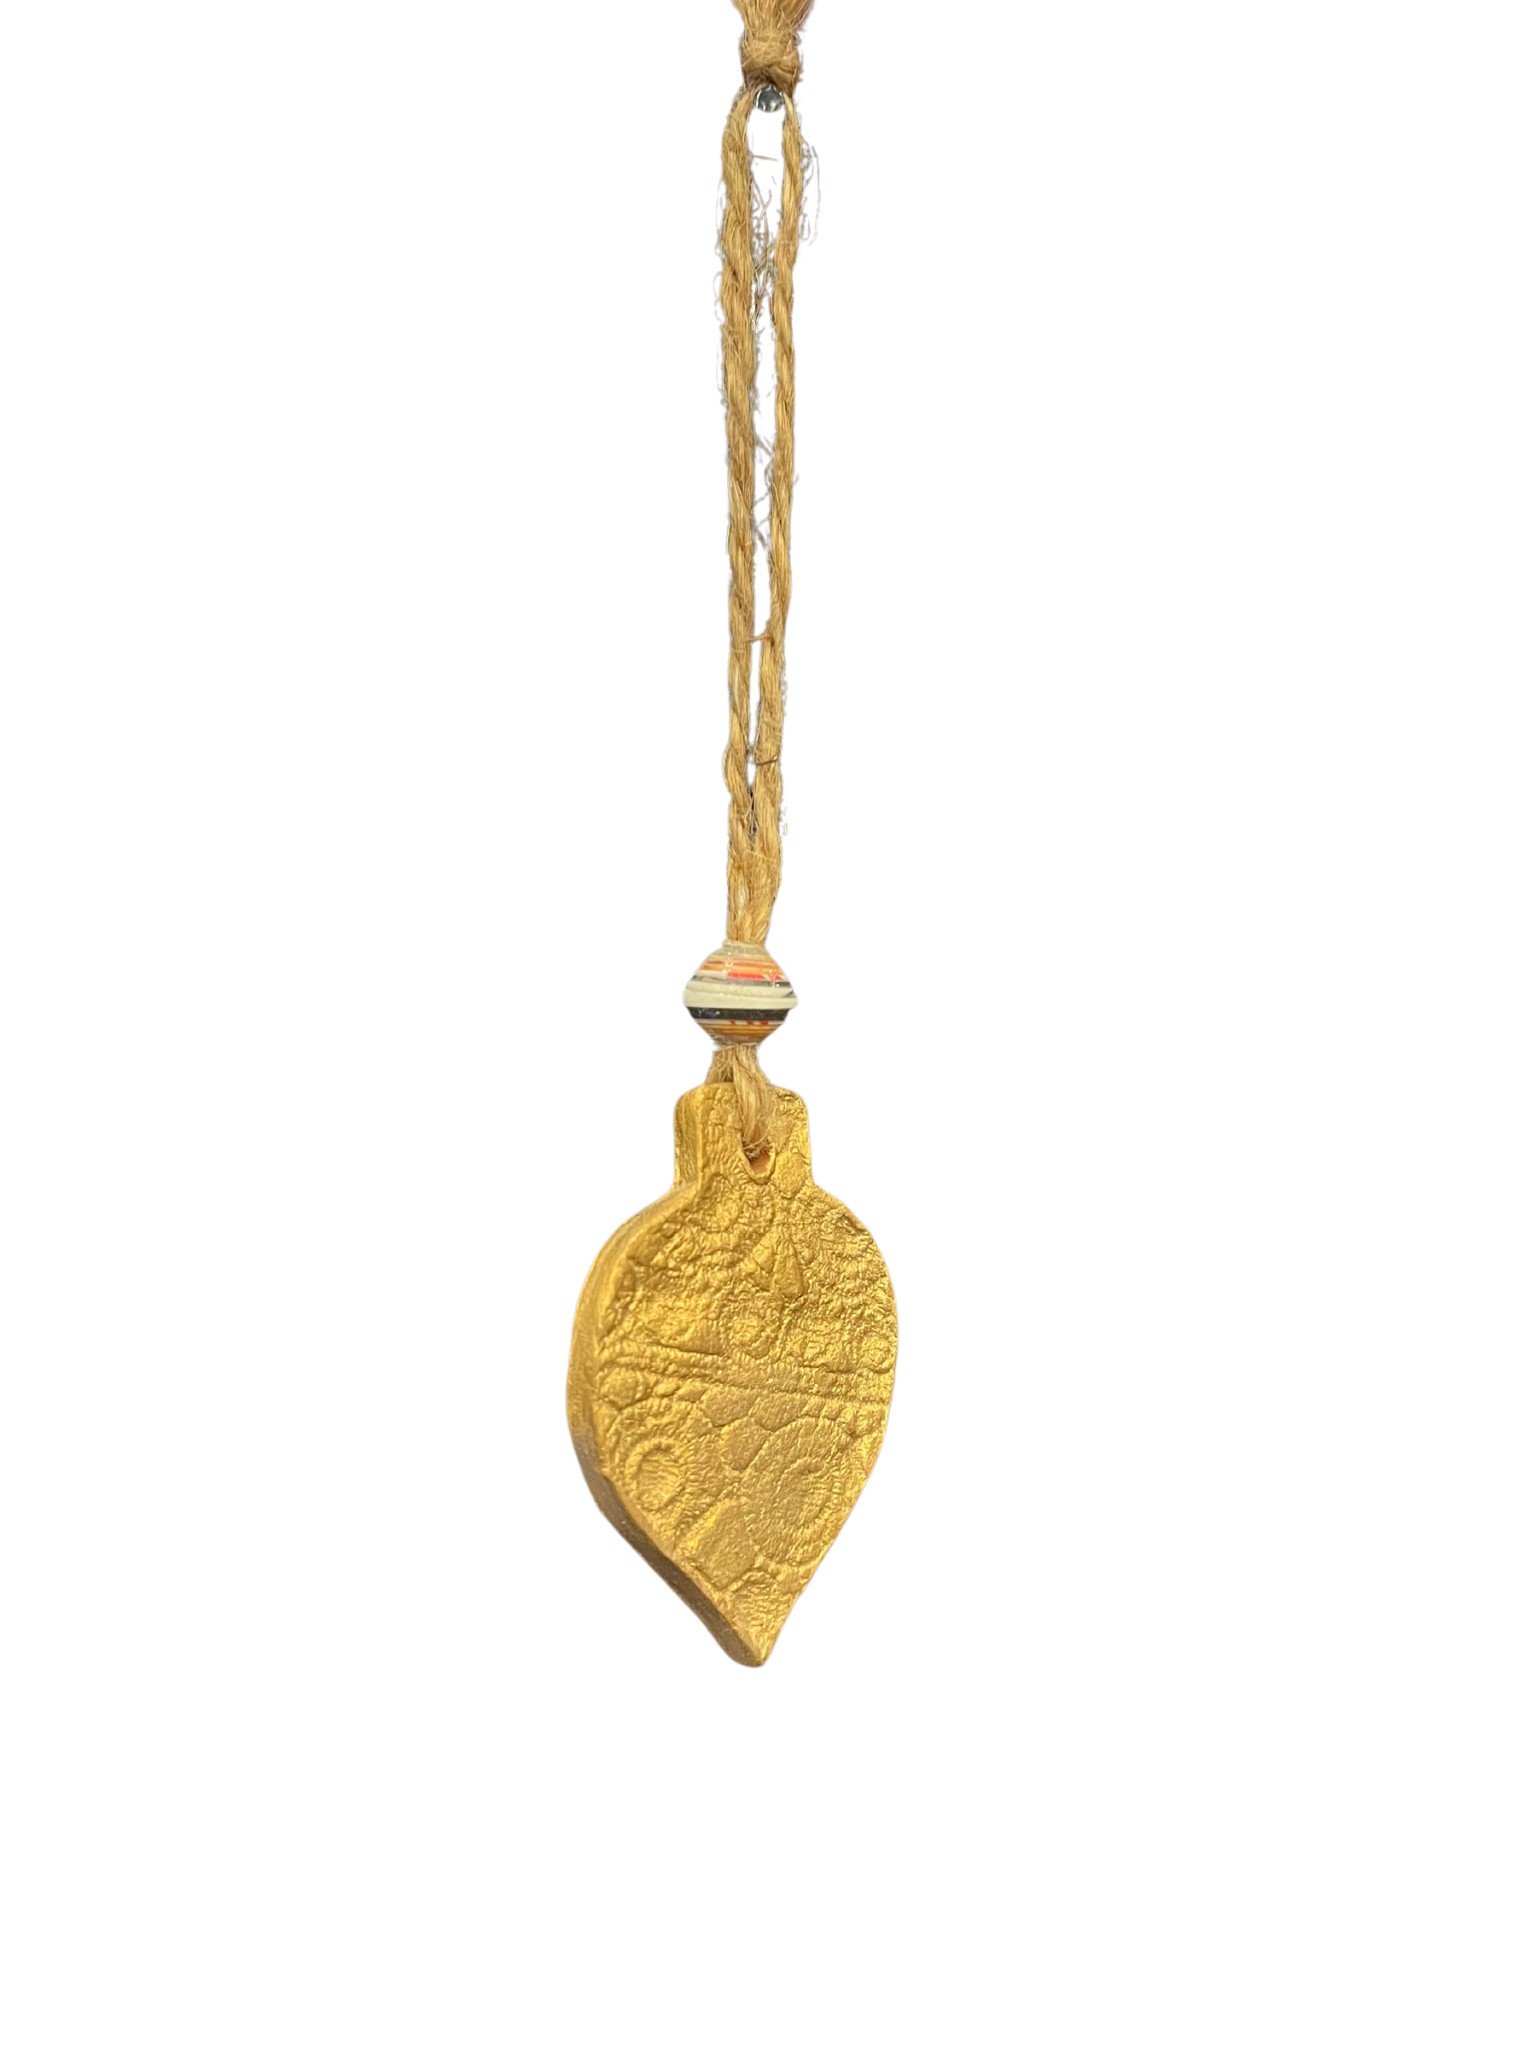 Haitian craftsmanship meets holiday décor with our Gold Lace Ceramic Bulb Ornament. This unique ornament is crafted by hand from locally sourced clay and hand-painted with a gold lace finish at our artisan center. Measuring approximately 5", it adds a special touch to any tree or holiday collection. Shop now and add some Haitian charm to your festive celebrations.